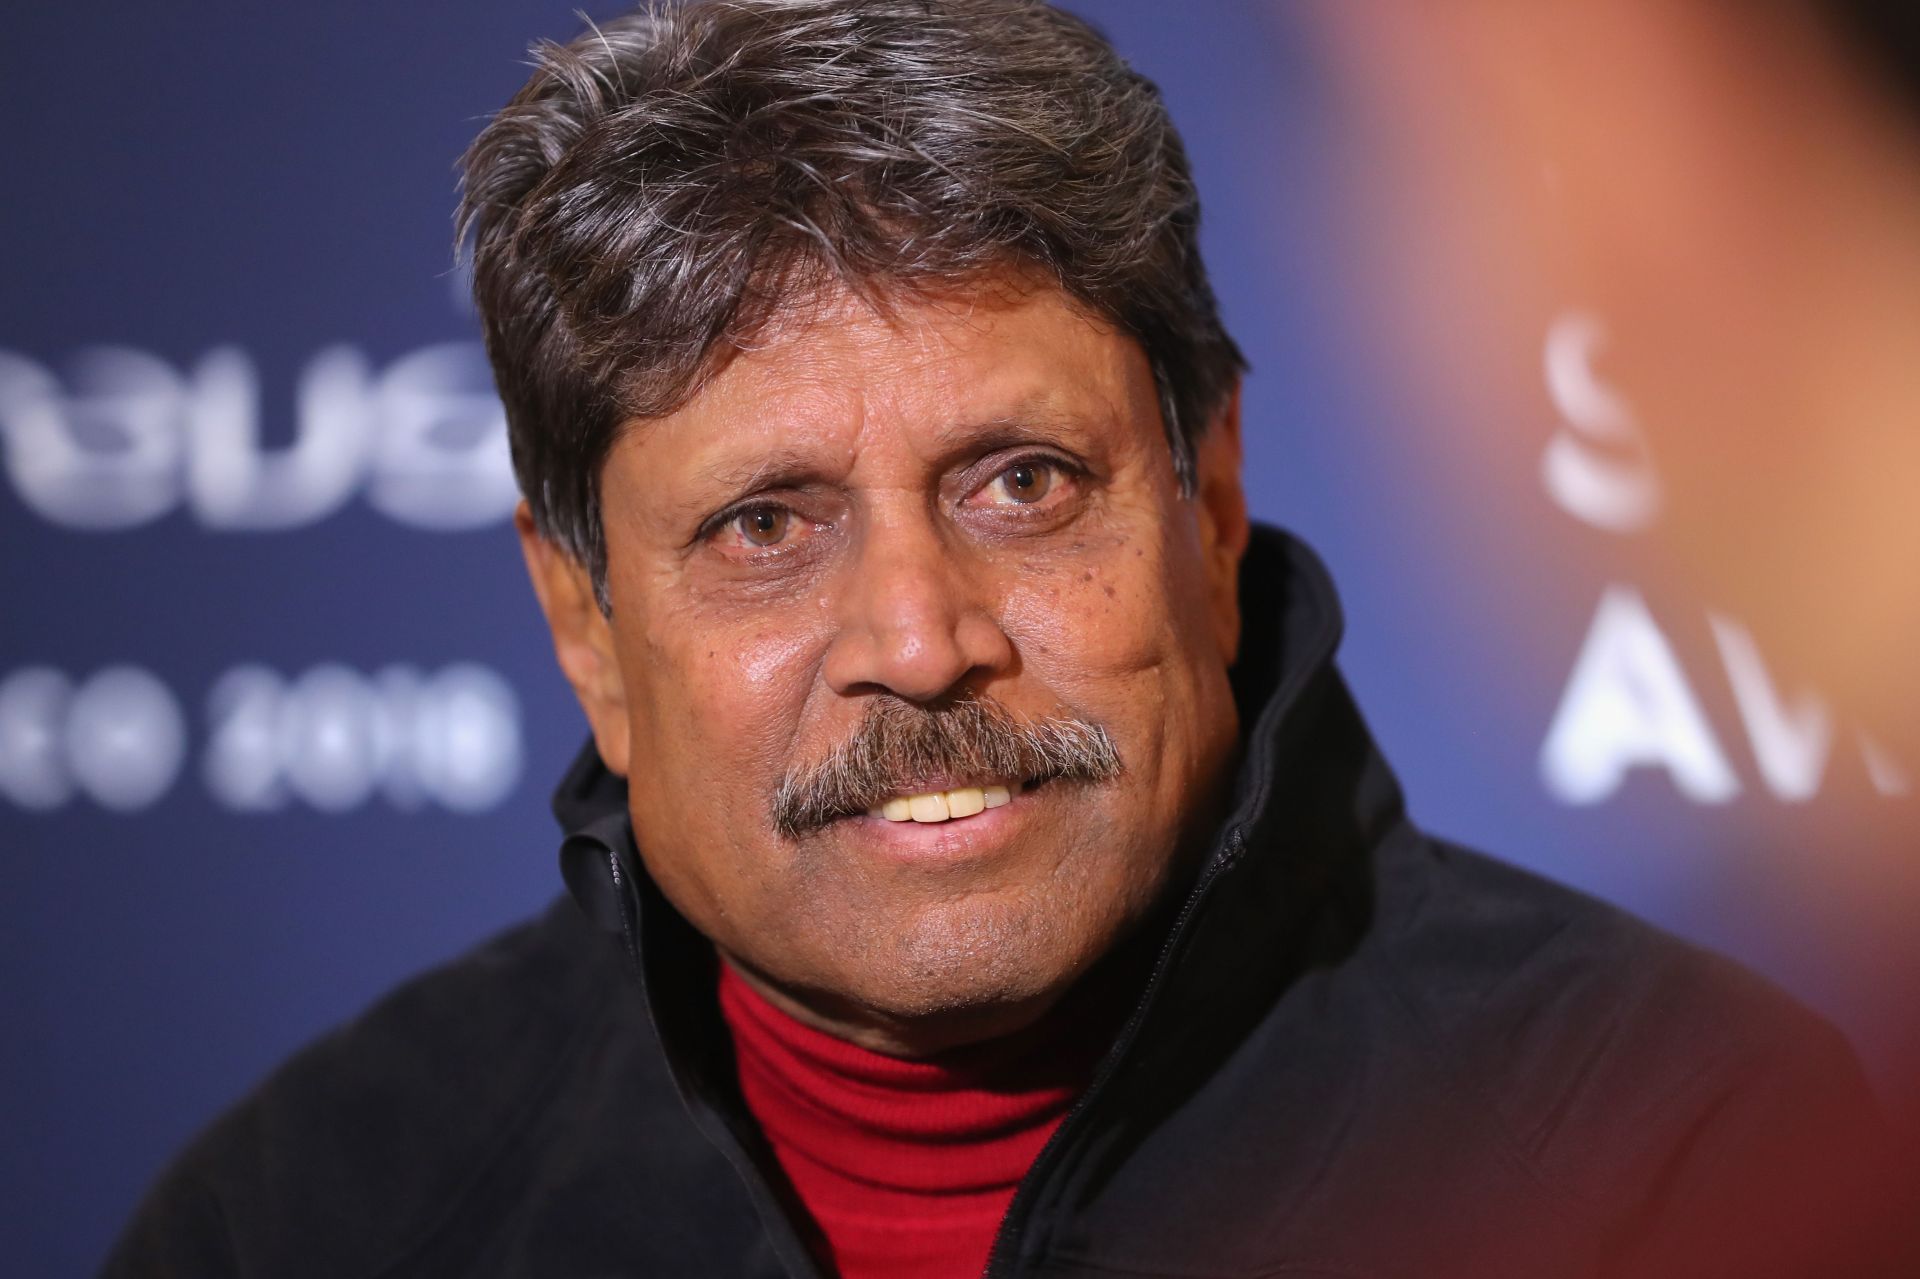 Kapil Dev praised Ravindra Jadeja (not in pic) for his ability to play without pressure.